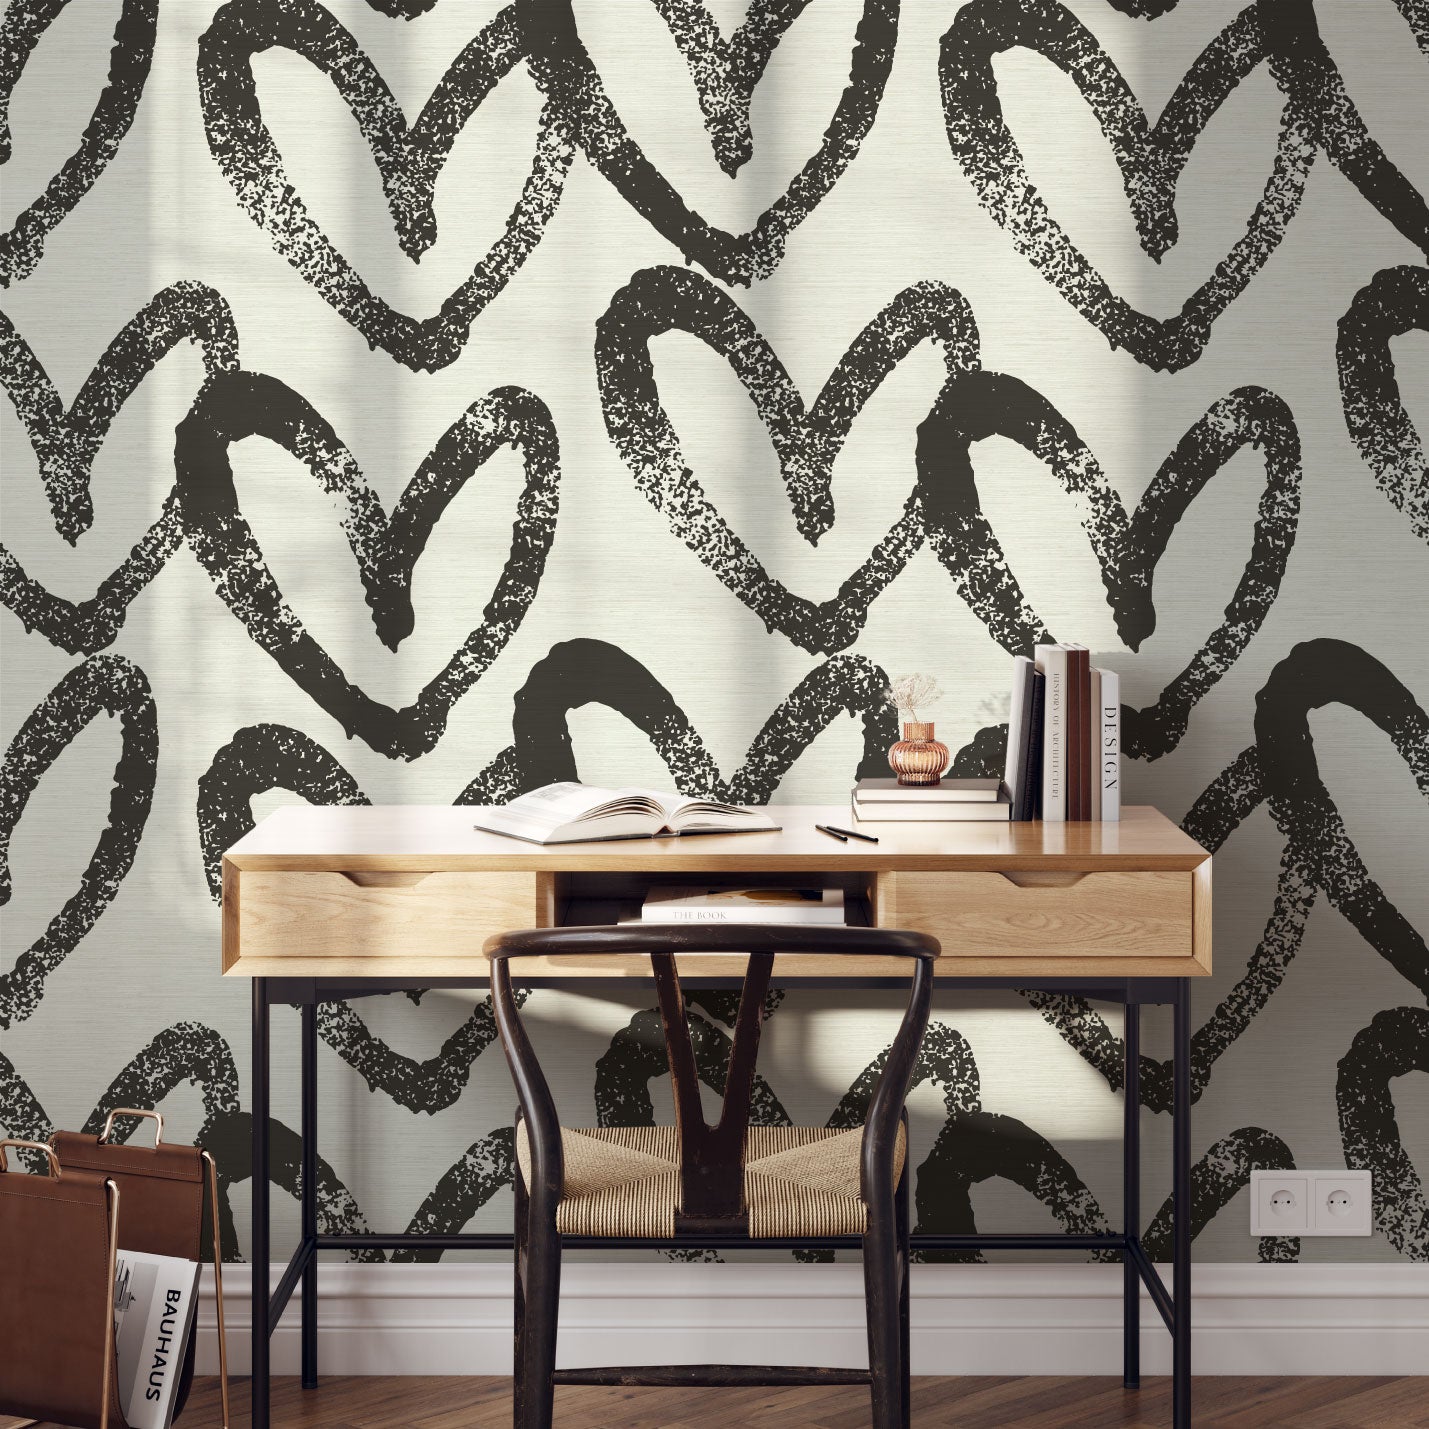 printed grasscloth wallpaper oversized heart print assortment collaboration with House of Shannon shan Natural Textured Eco-Friendly Non-toxic High-quality Sustainable practices Sustainability Interior Design Wall covering Bold Wallpaper Custom Tailor-made Retro chic kids playroom hand drawn fun cream natural neutral black off-white office study library